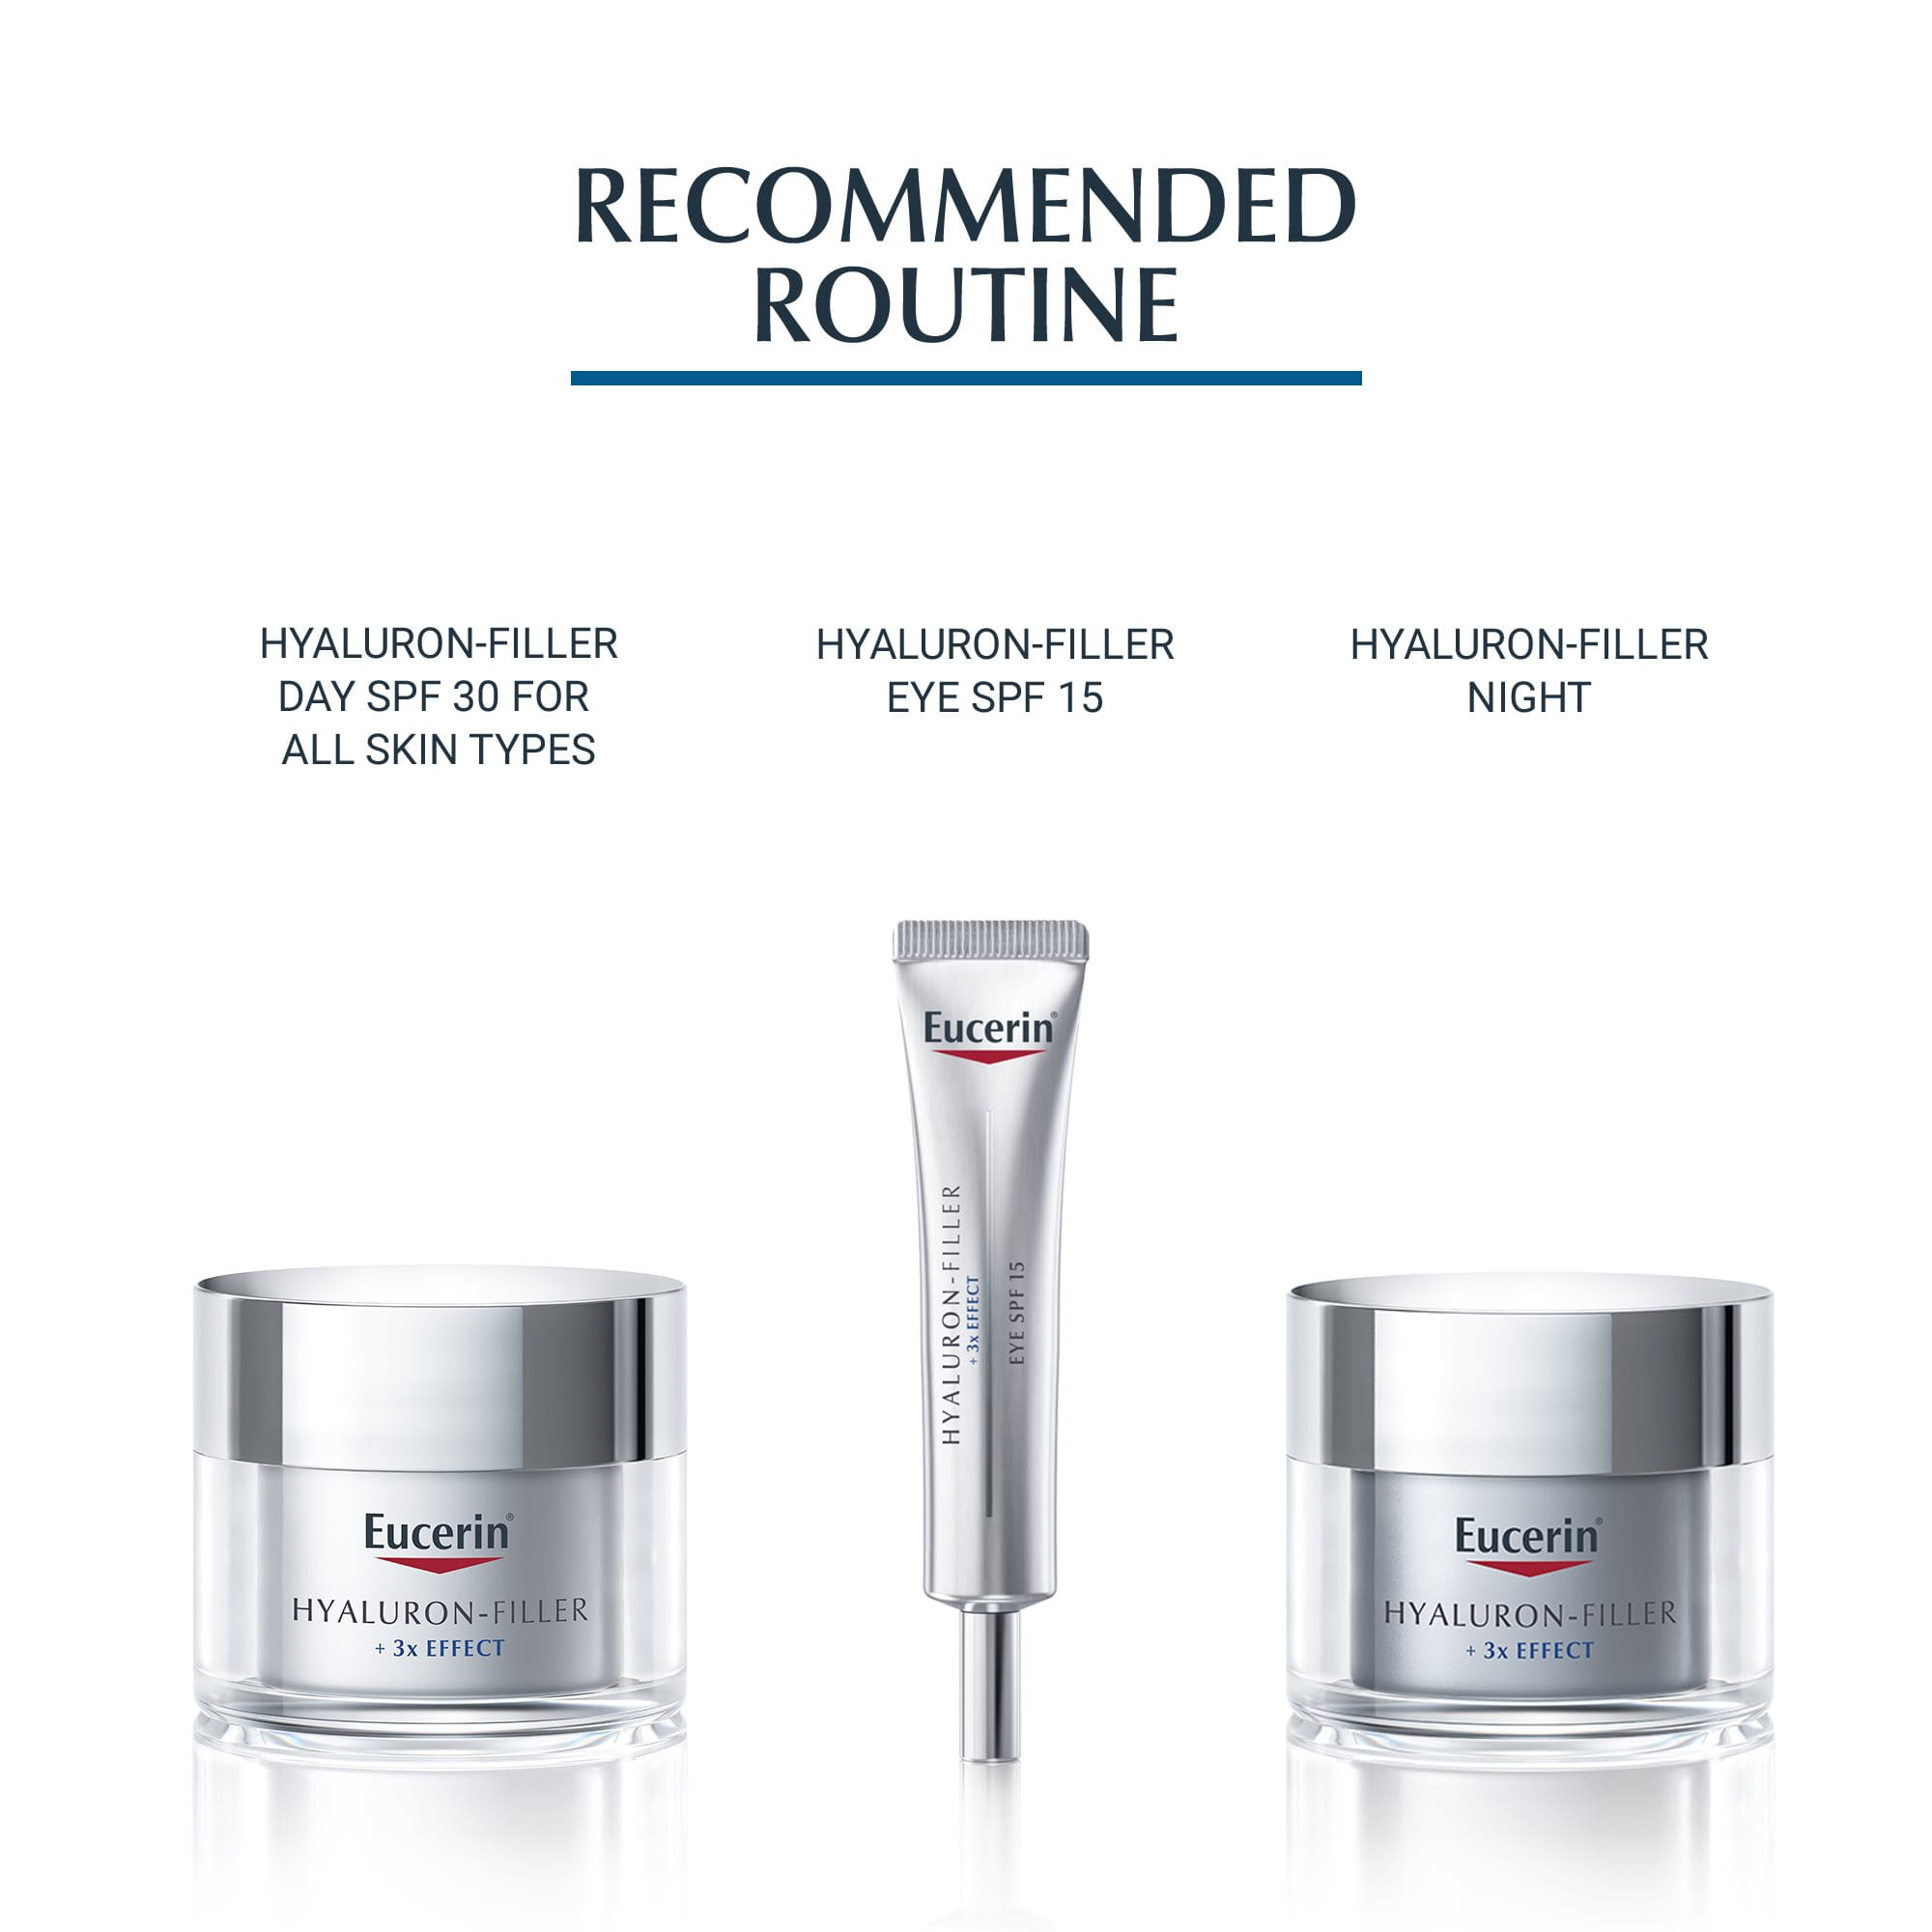 08_recommended_routine